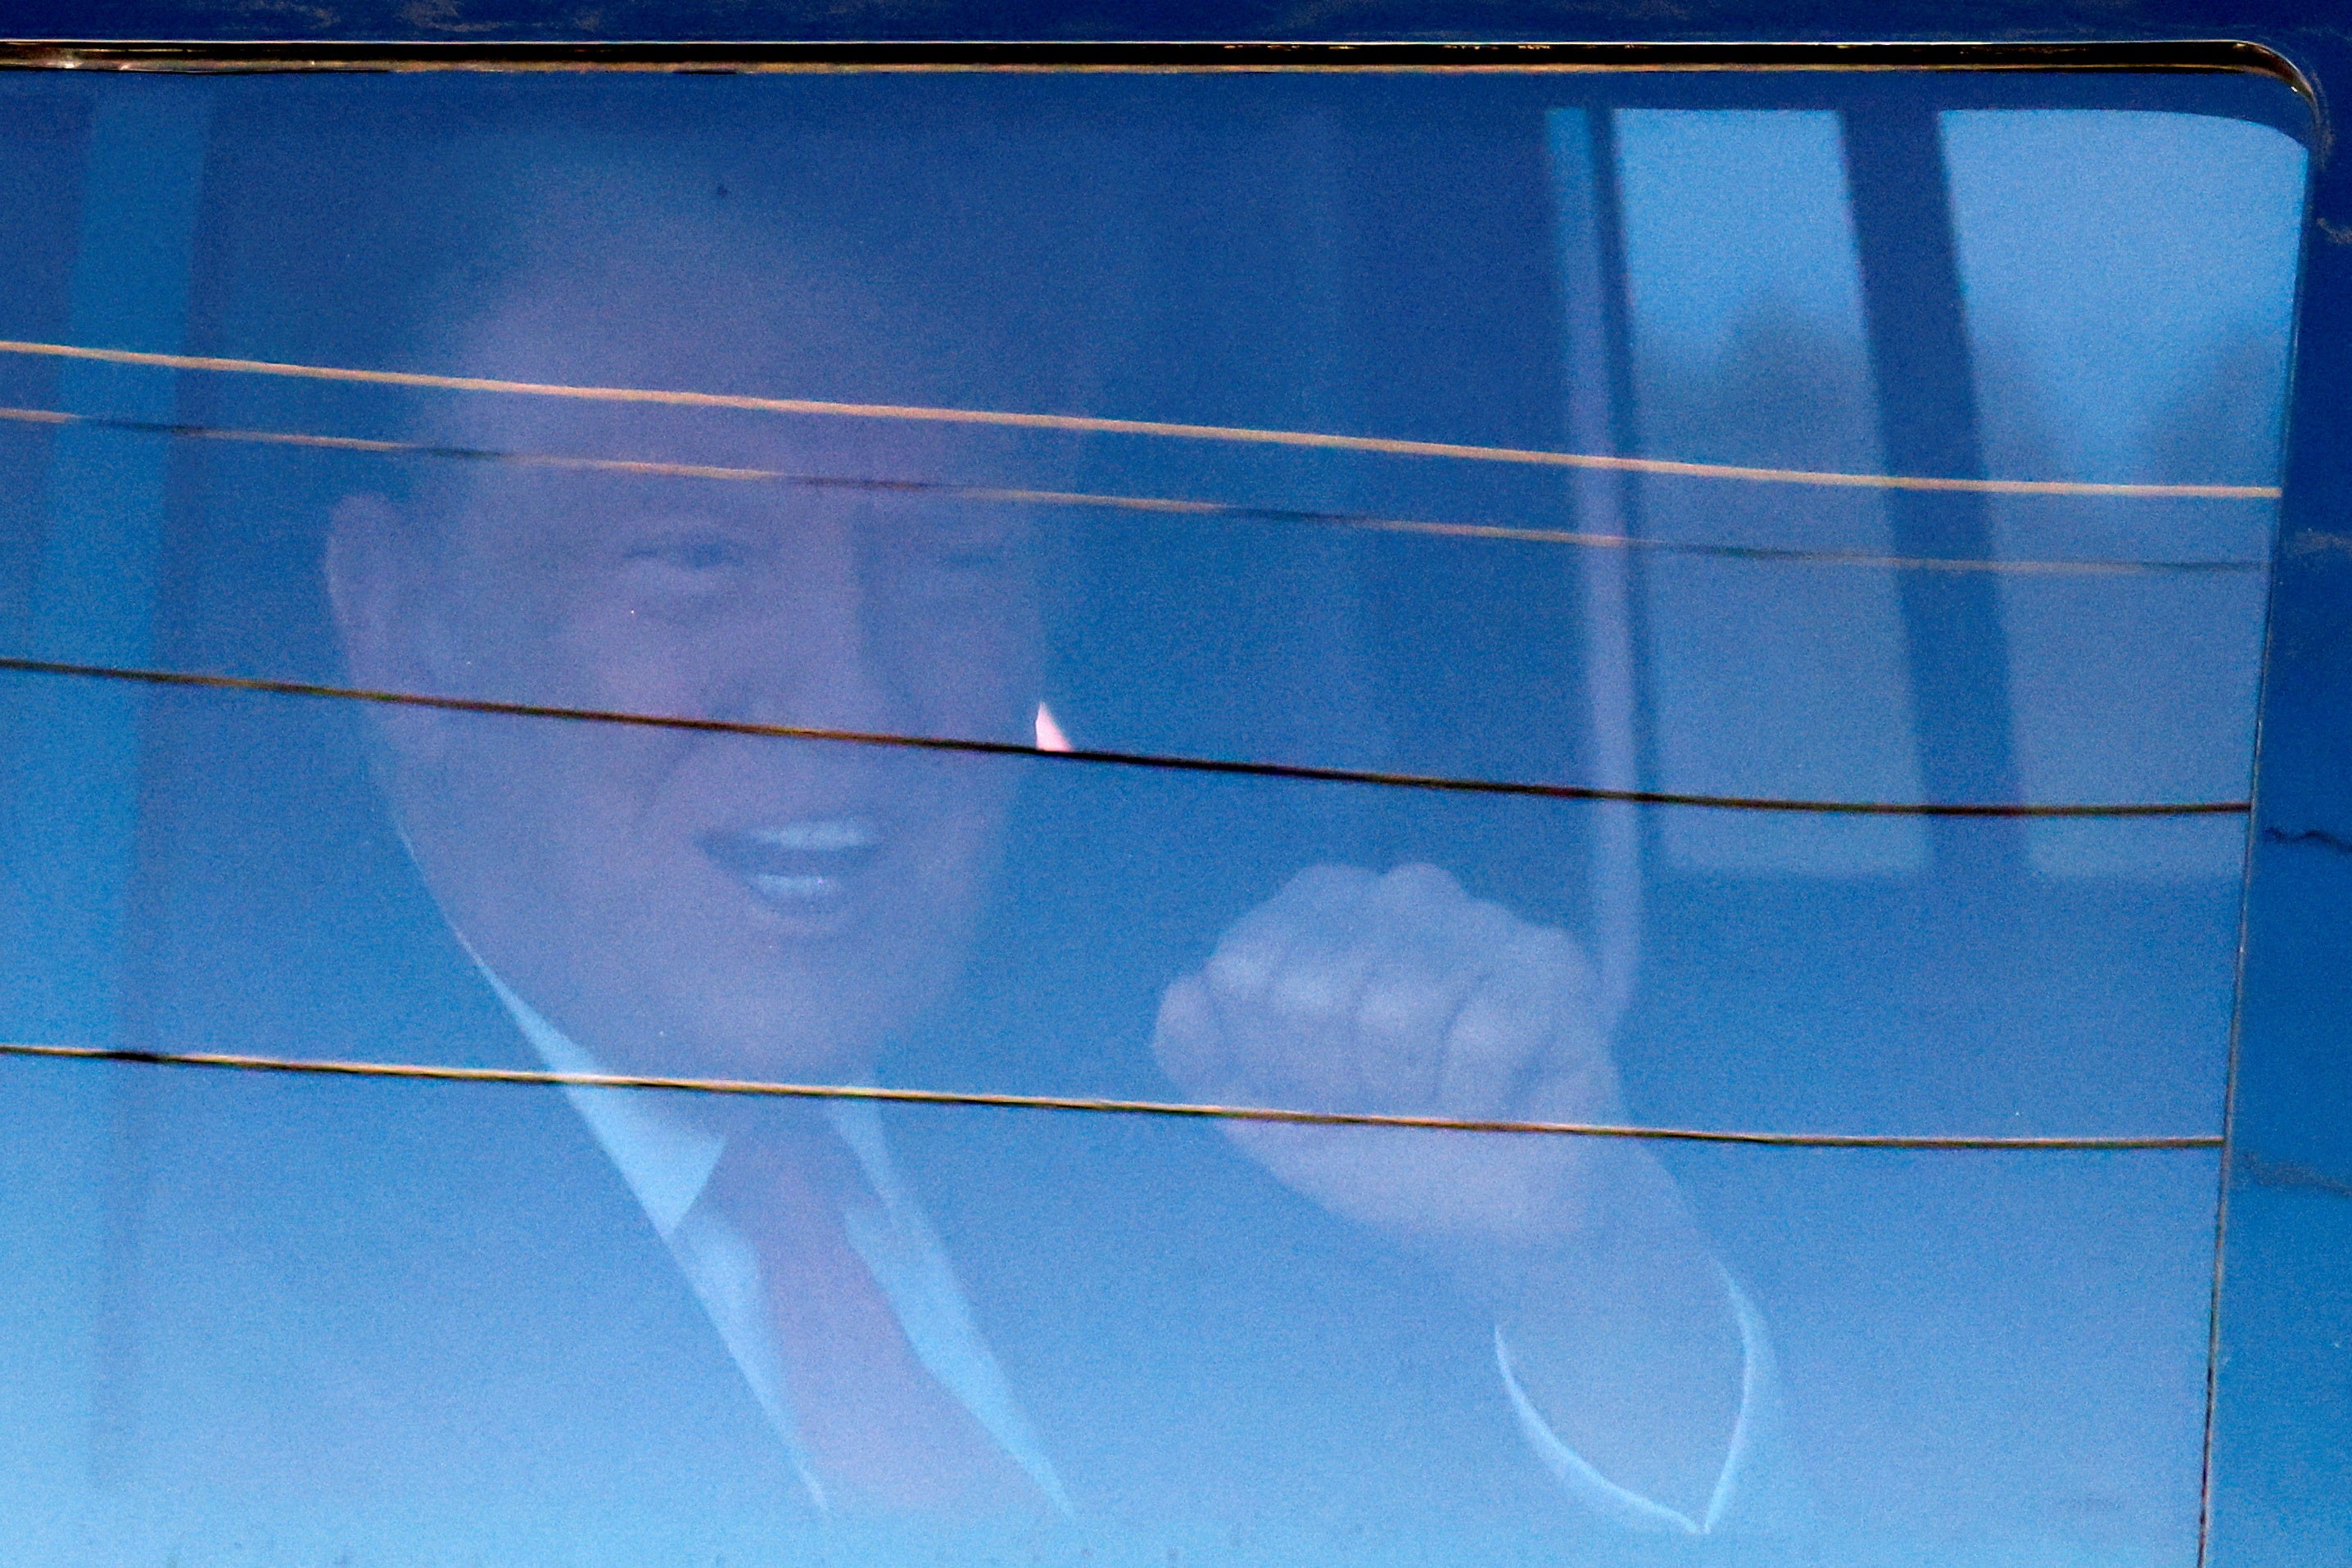 Donald Trump arrives at a federal courthouse in Florida on 14 March for a hearing on his attempts to dismiss criminal charges in a classified documents case.